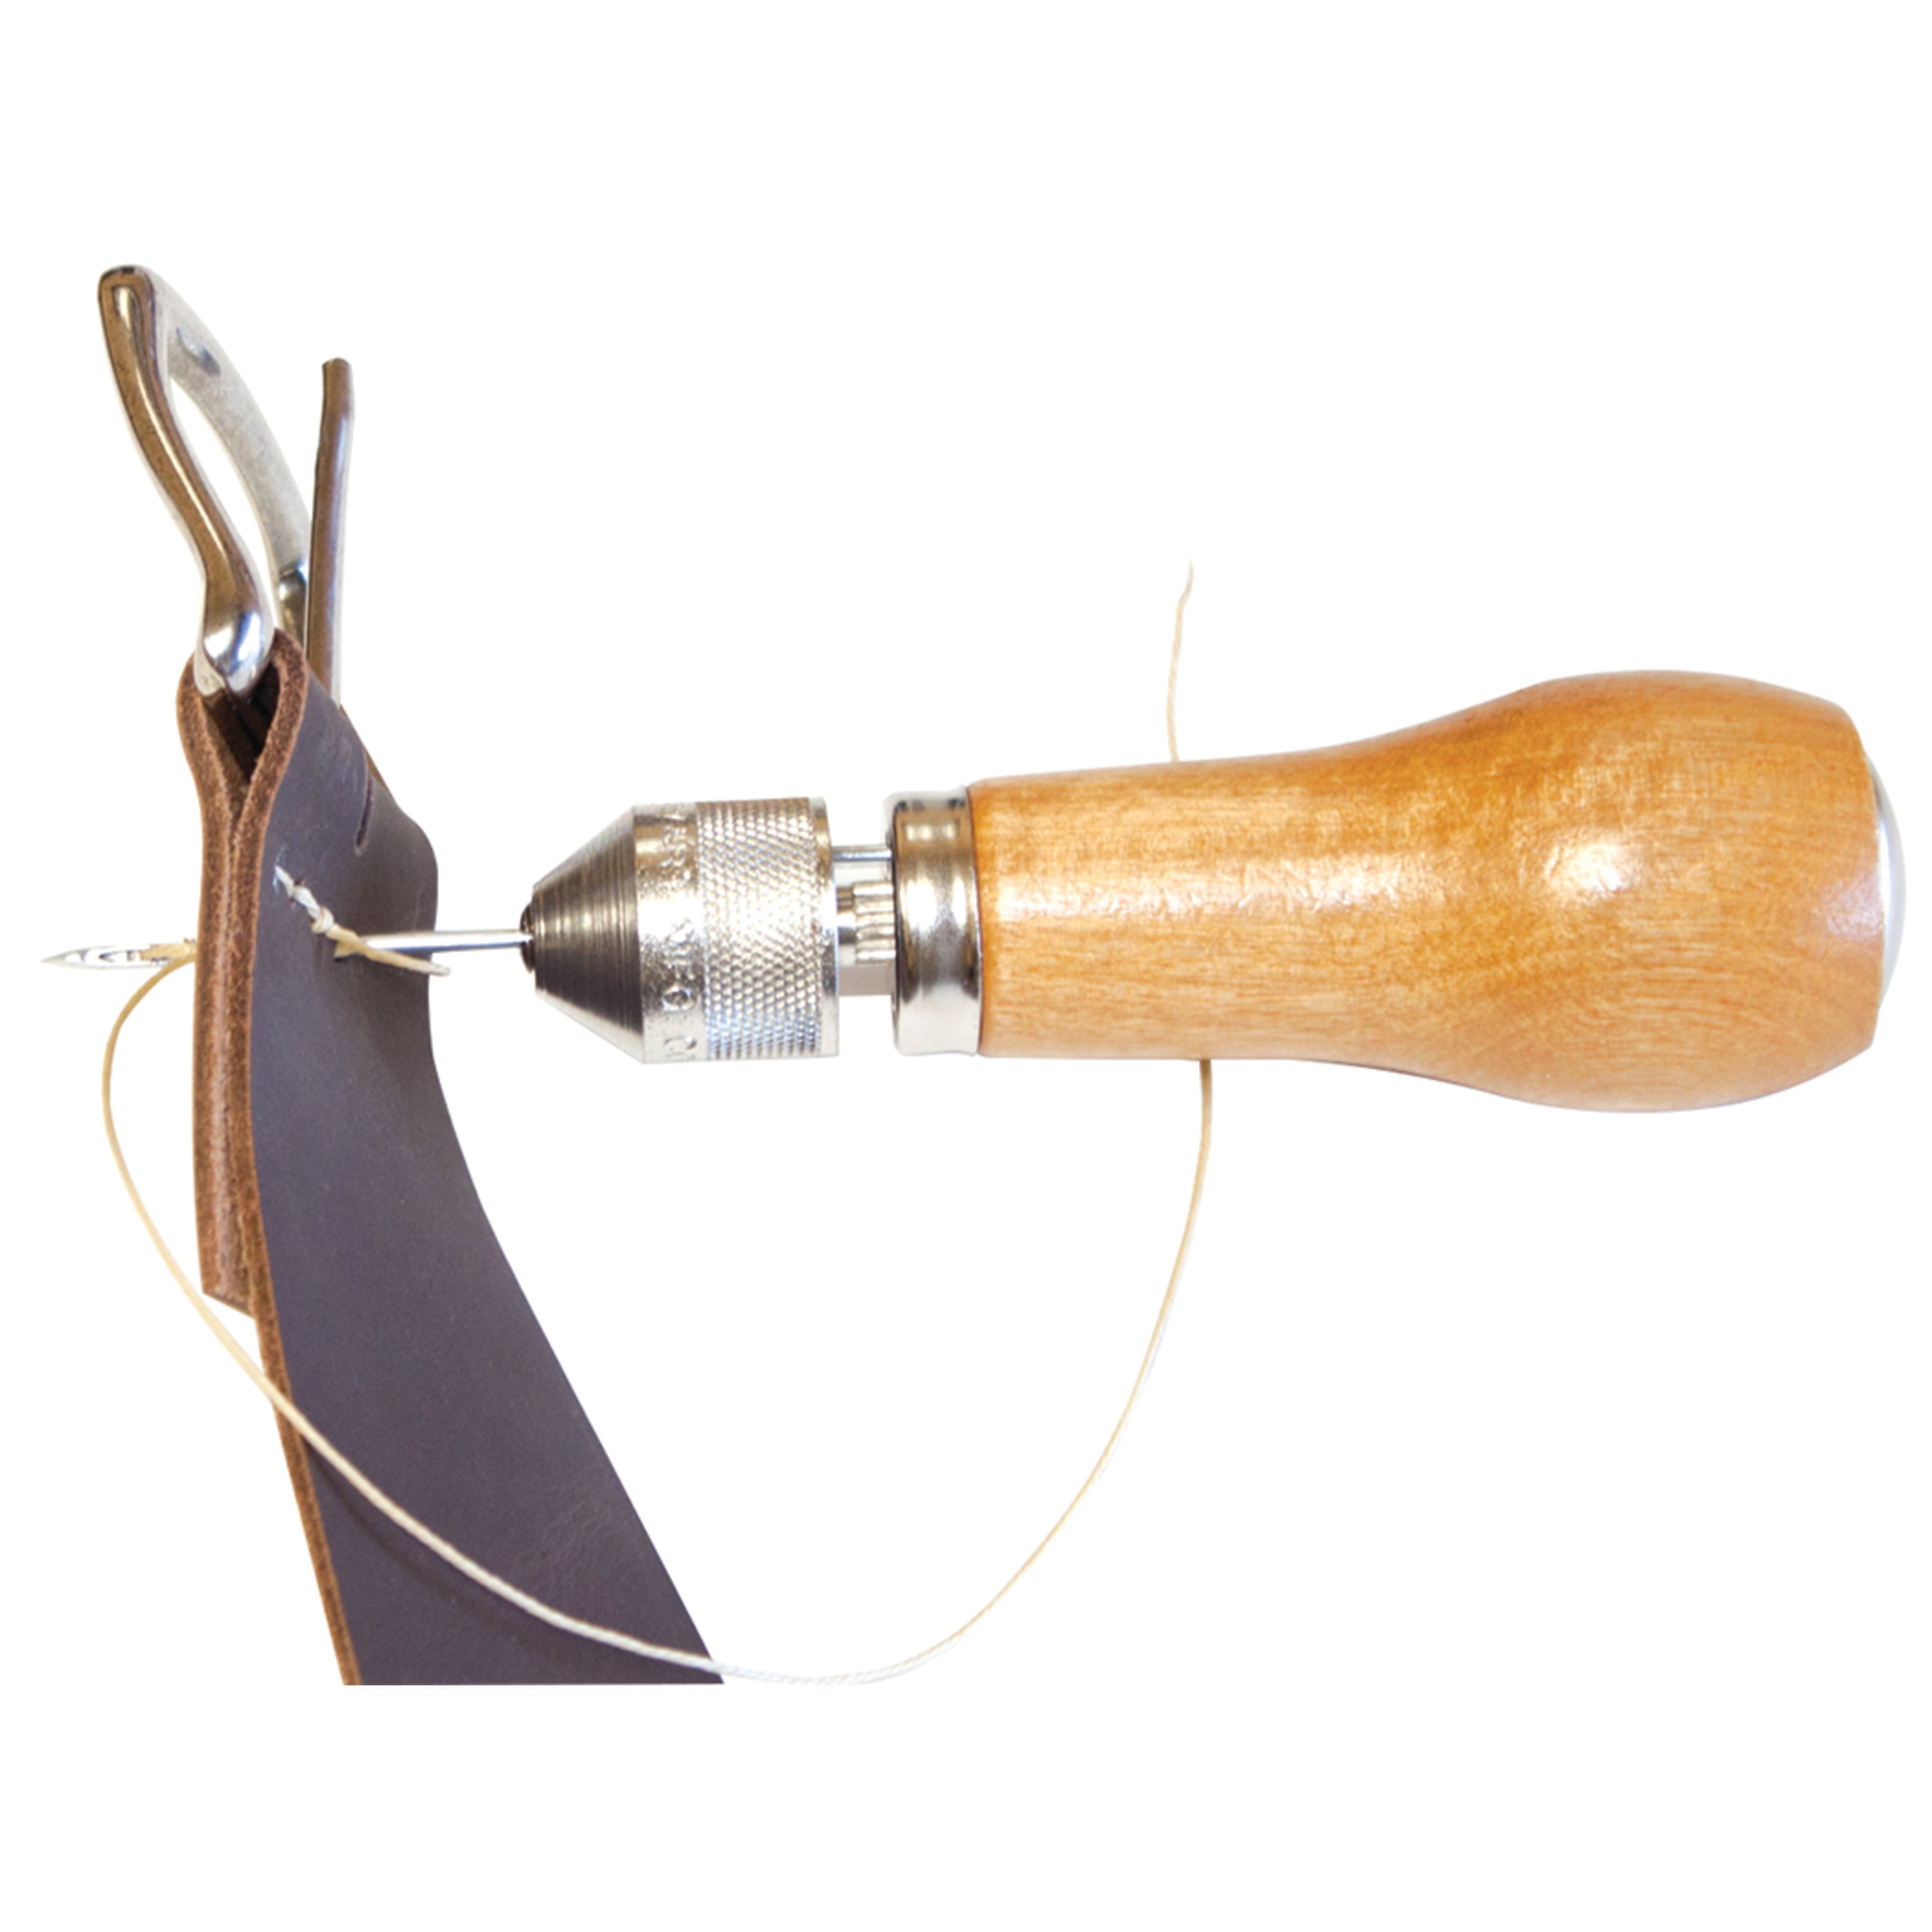 How to Use a Sewing Awl - Speedy Stitcher 